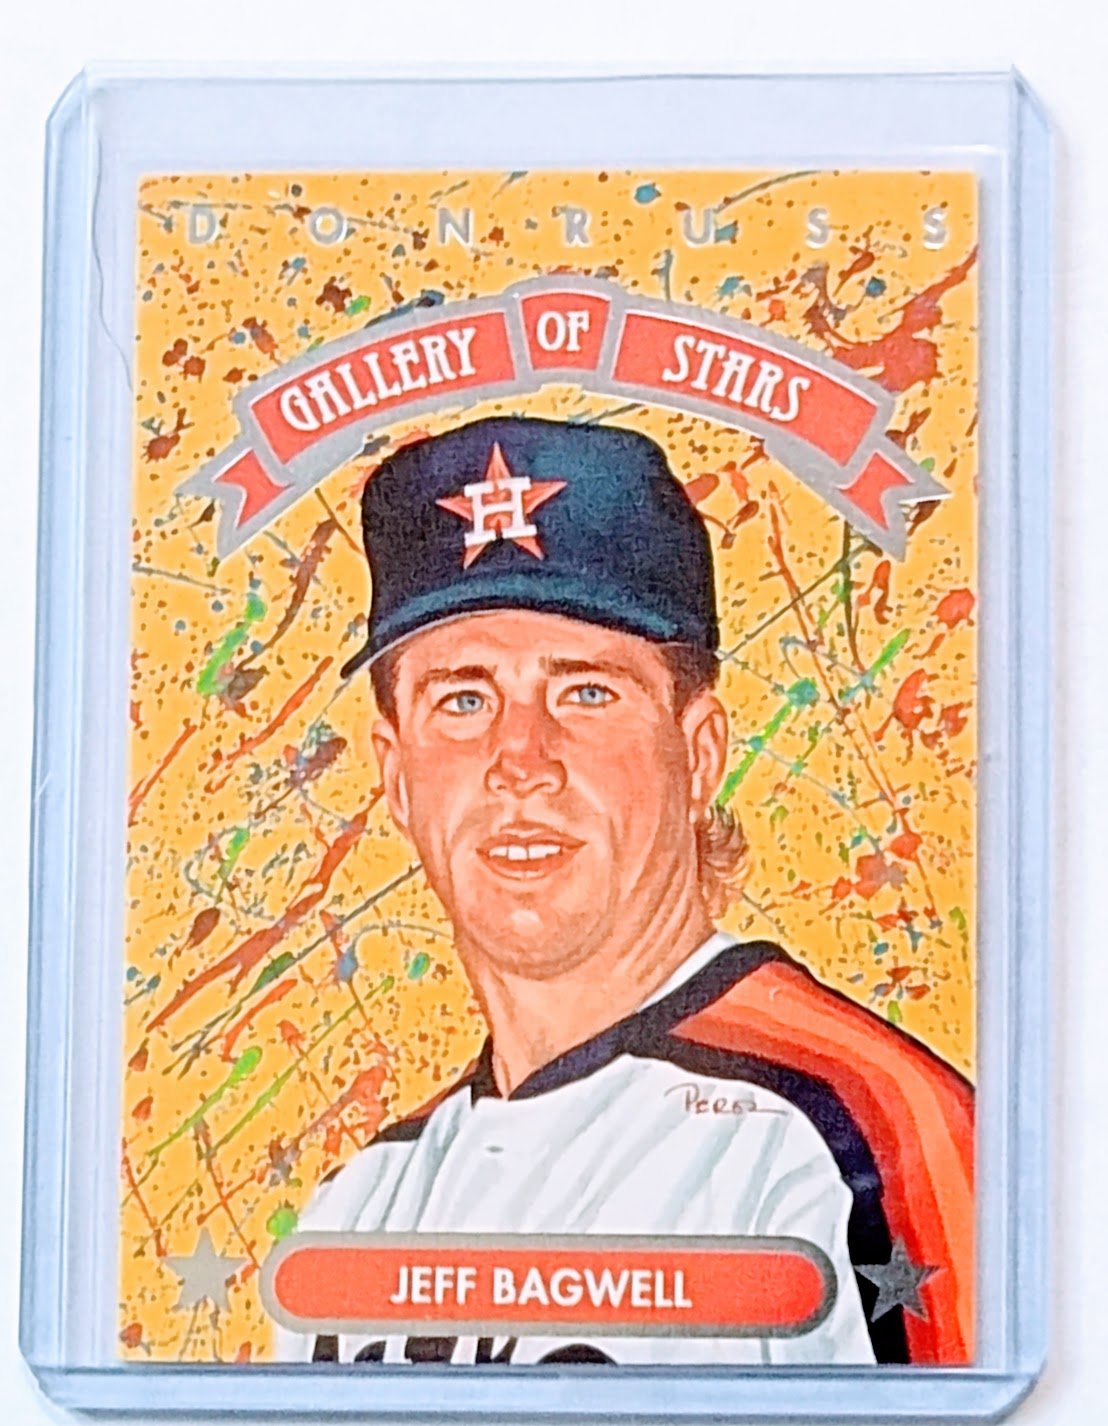 1993 Donruss Gallery of Stars Jeff Bagwell Baseball Trading Card TPTV simple Xclusive Collectibles   